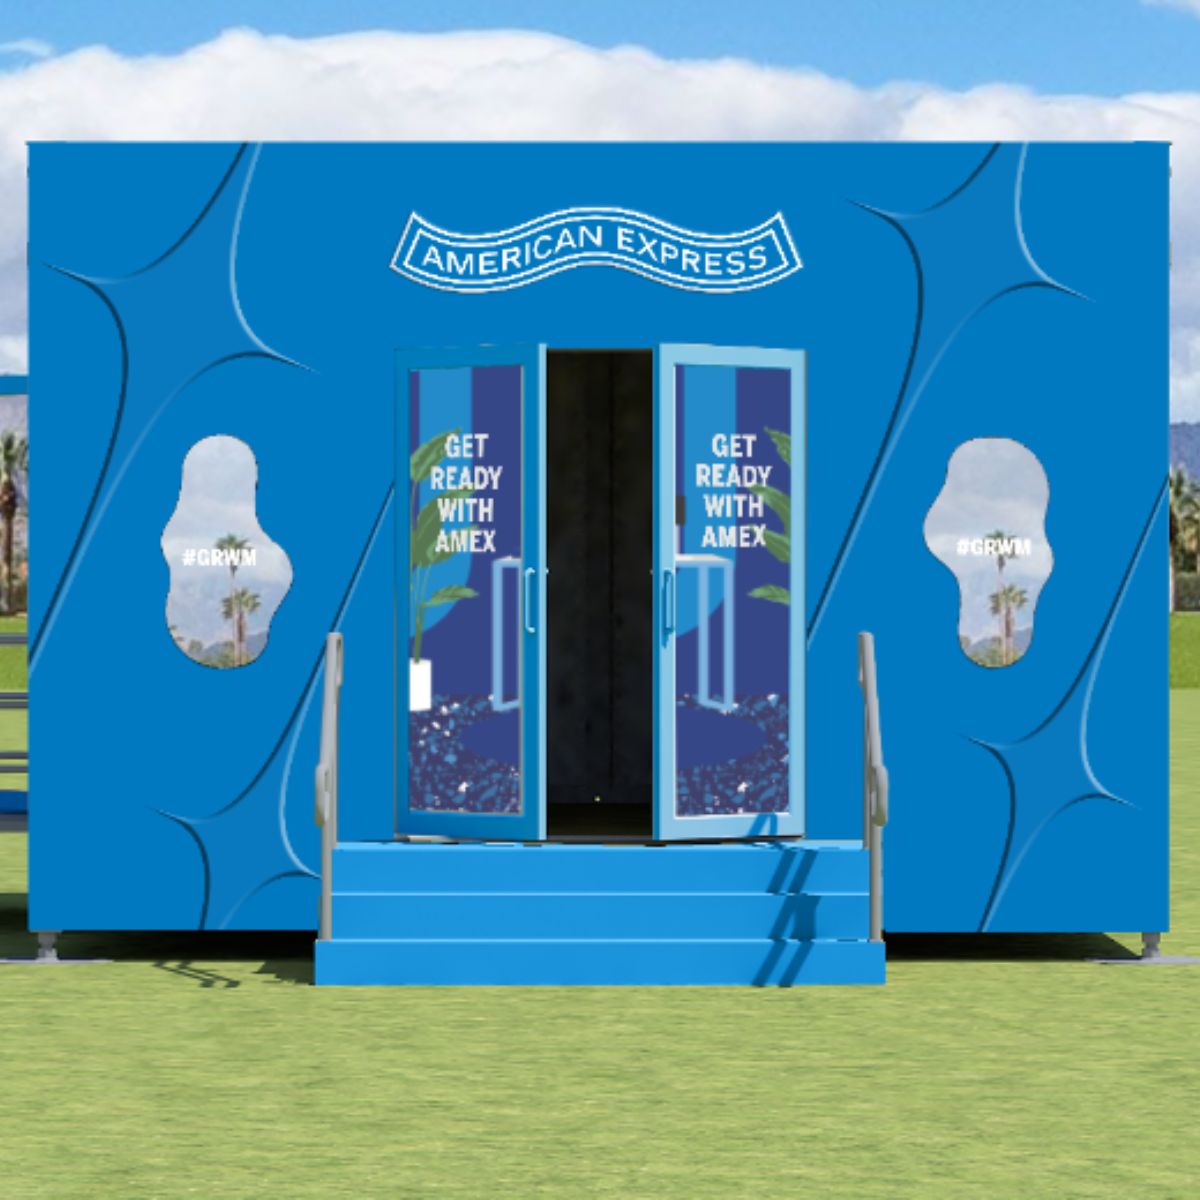 Get Ready with Amex booth photo